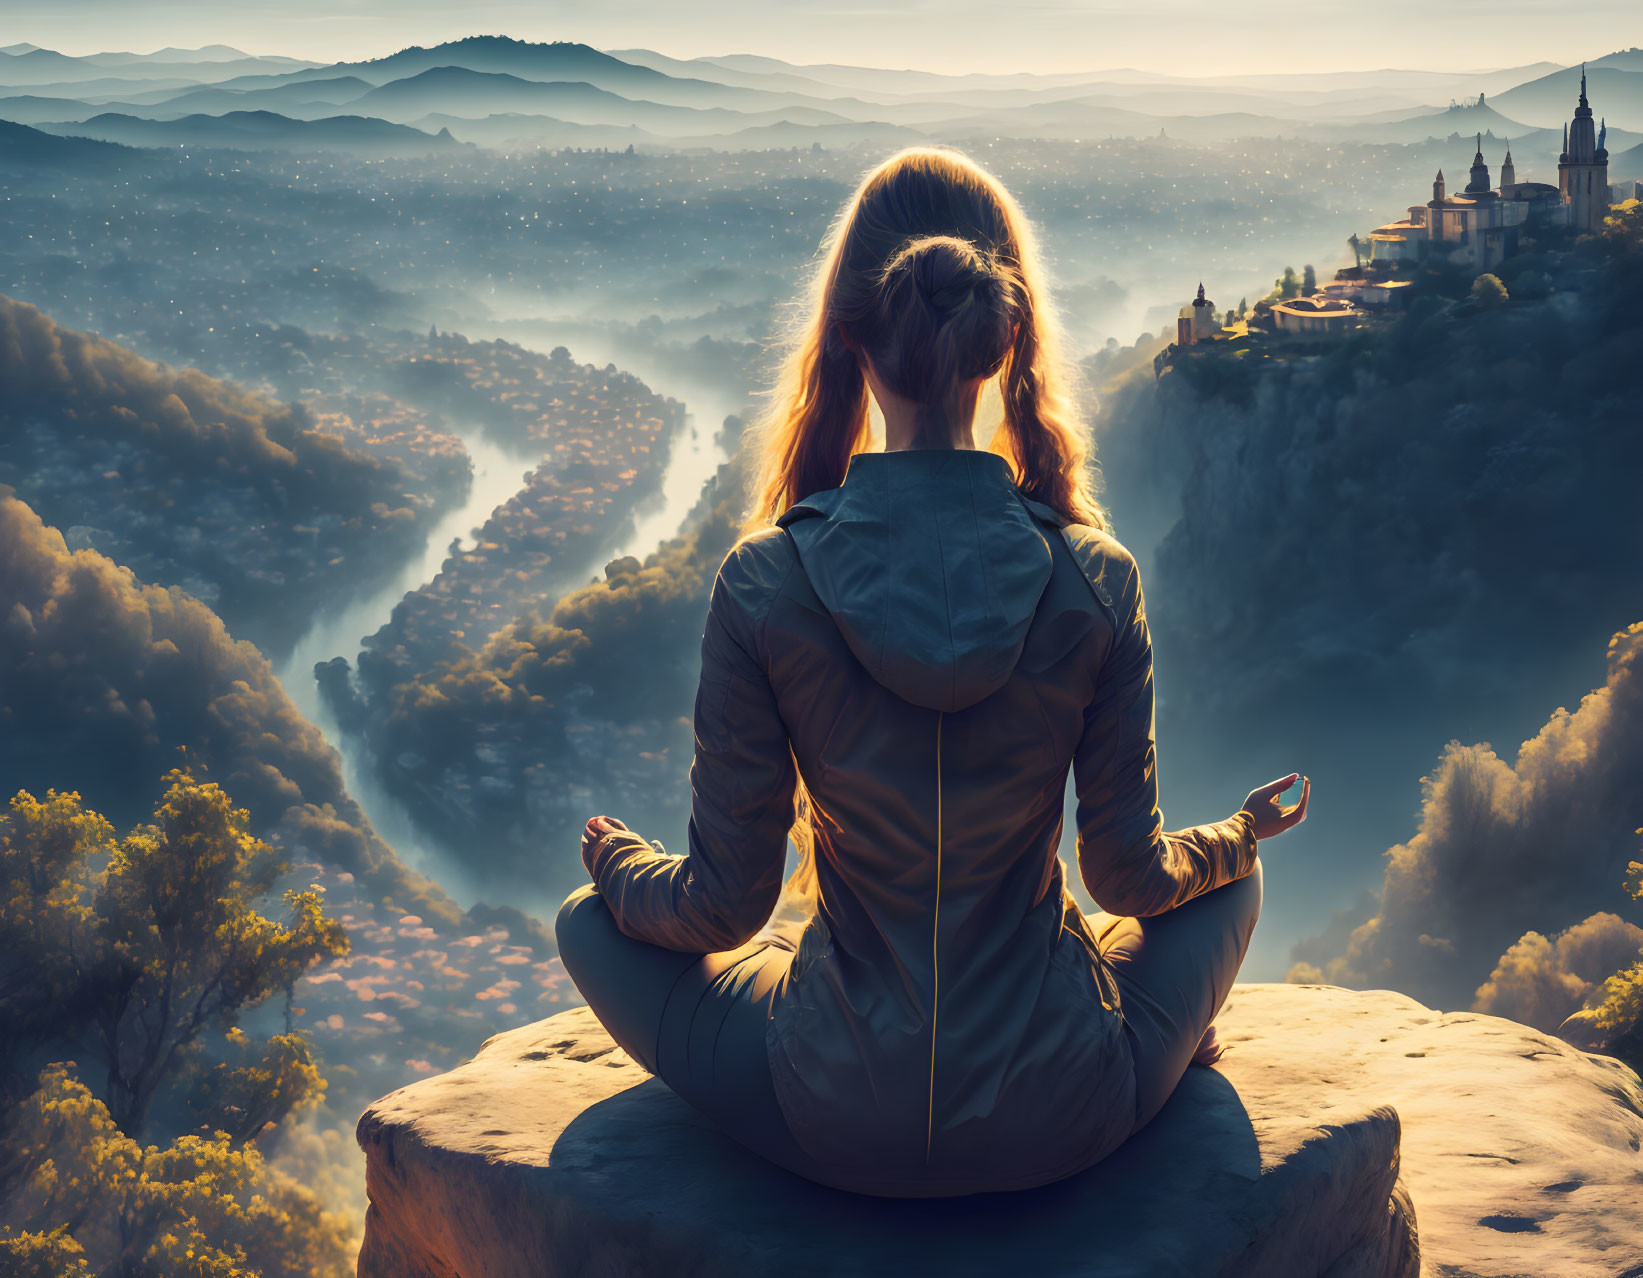 Woman meditating on cliff with misty river valley, hills, and castle at sunrise